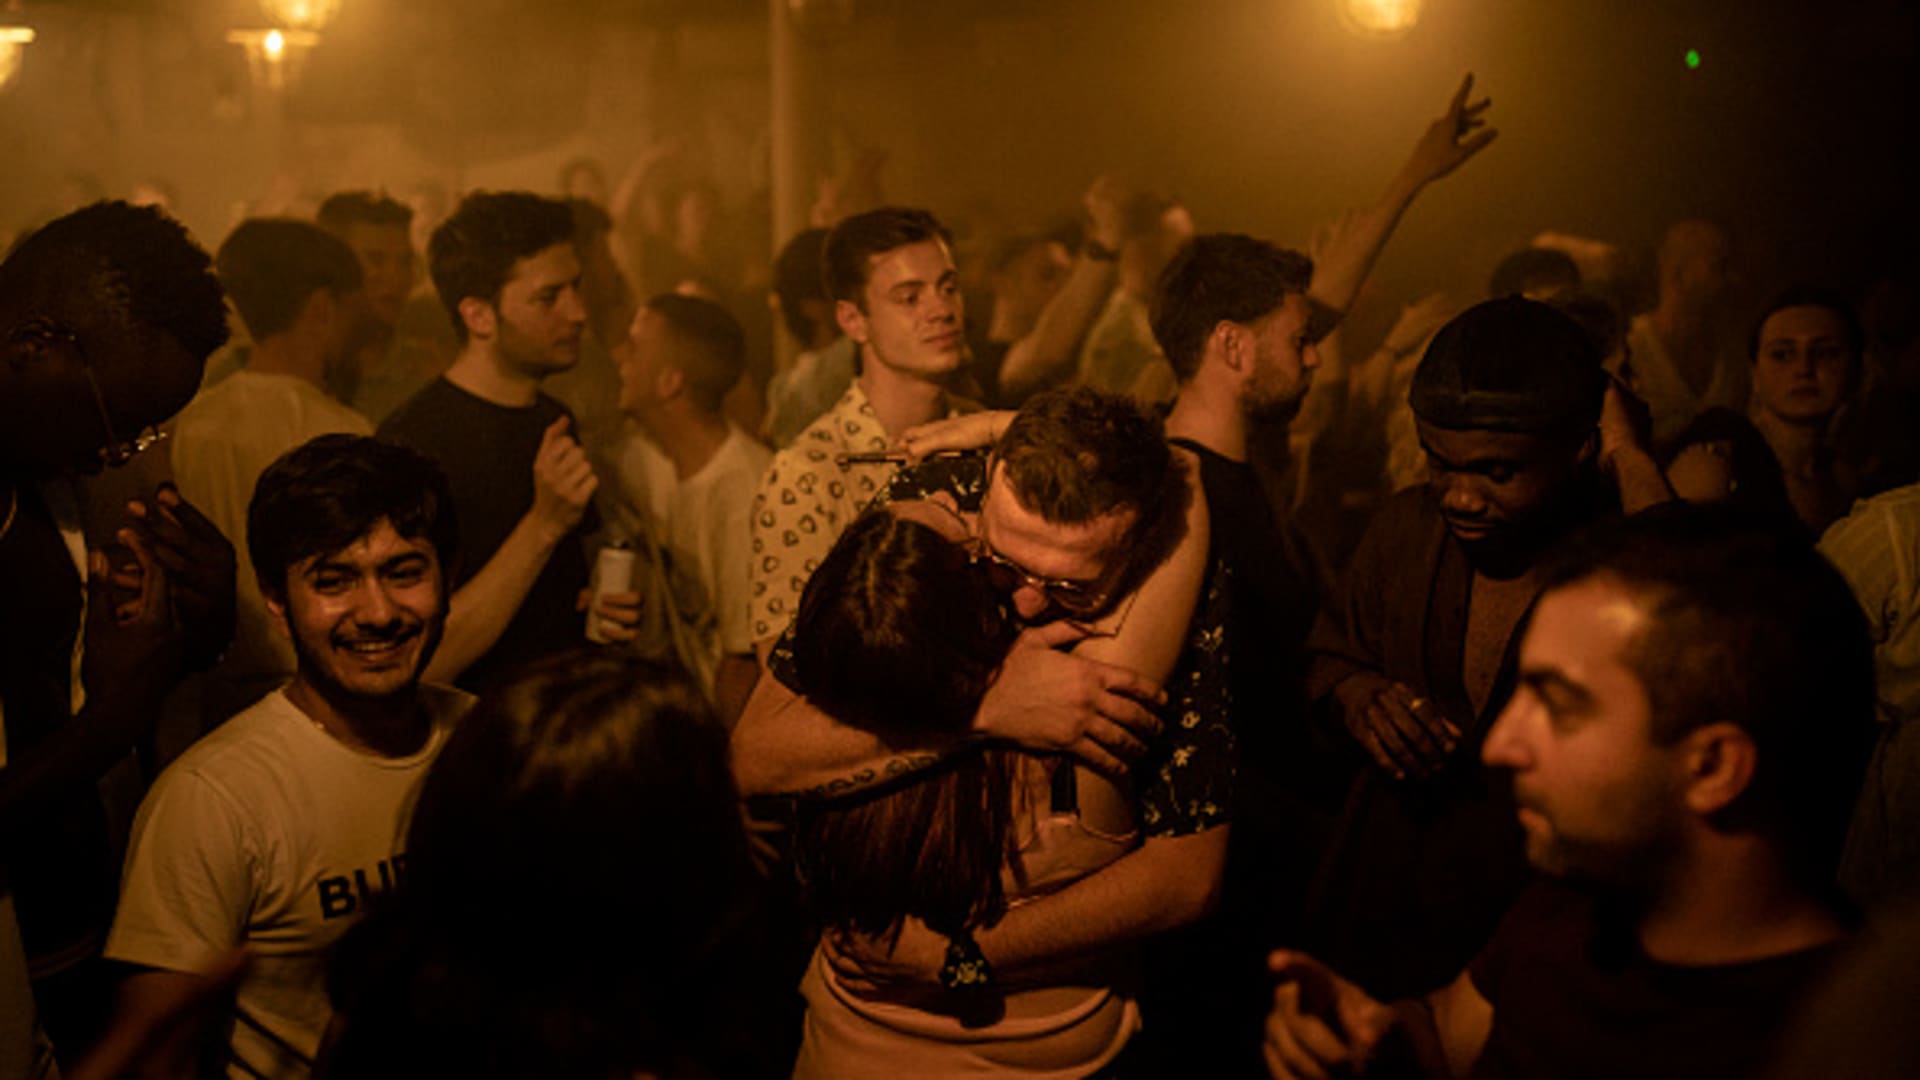 Two people hug in the middle of the dancefloor at Egg London nightclub in the early hours of July 19, 2021 in London, England. As of 12:01 on Monday, July 19, England will drop most of its remaining Covid-19 social restrictions, such as those requiring indoor mask-wearing and limits on group gatherings, among other rules.